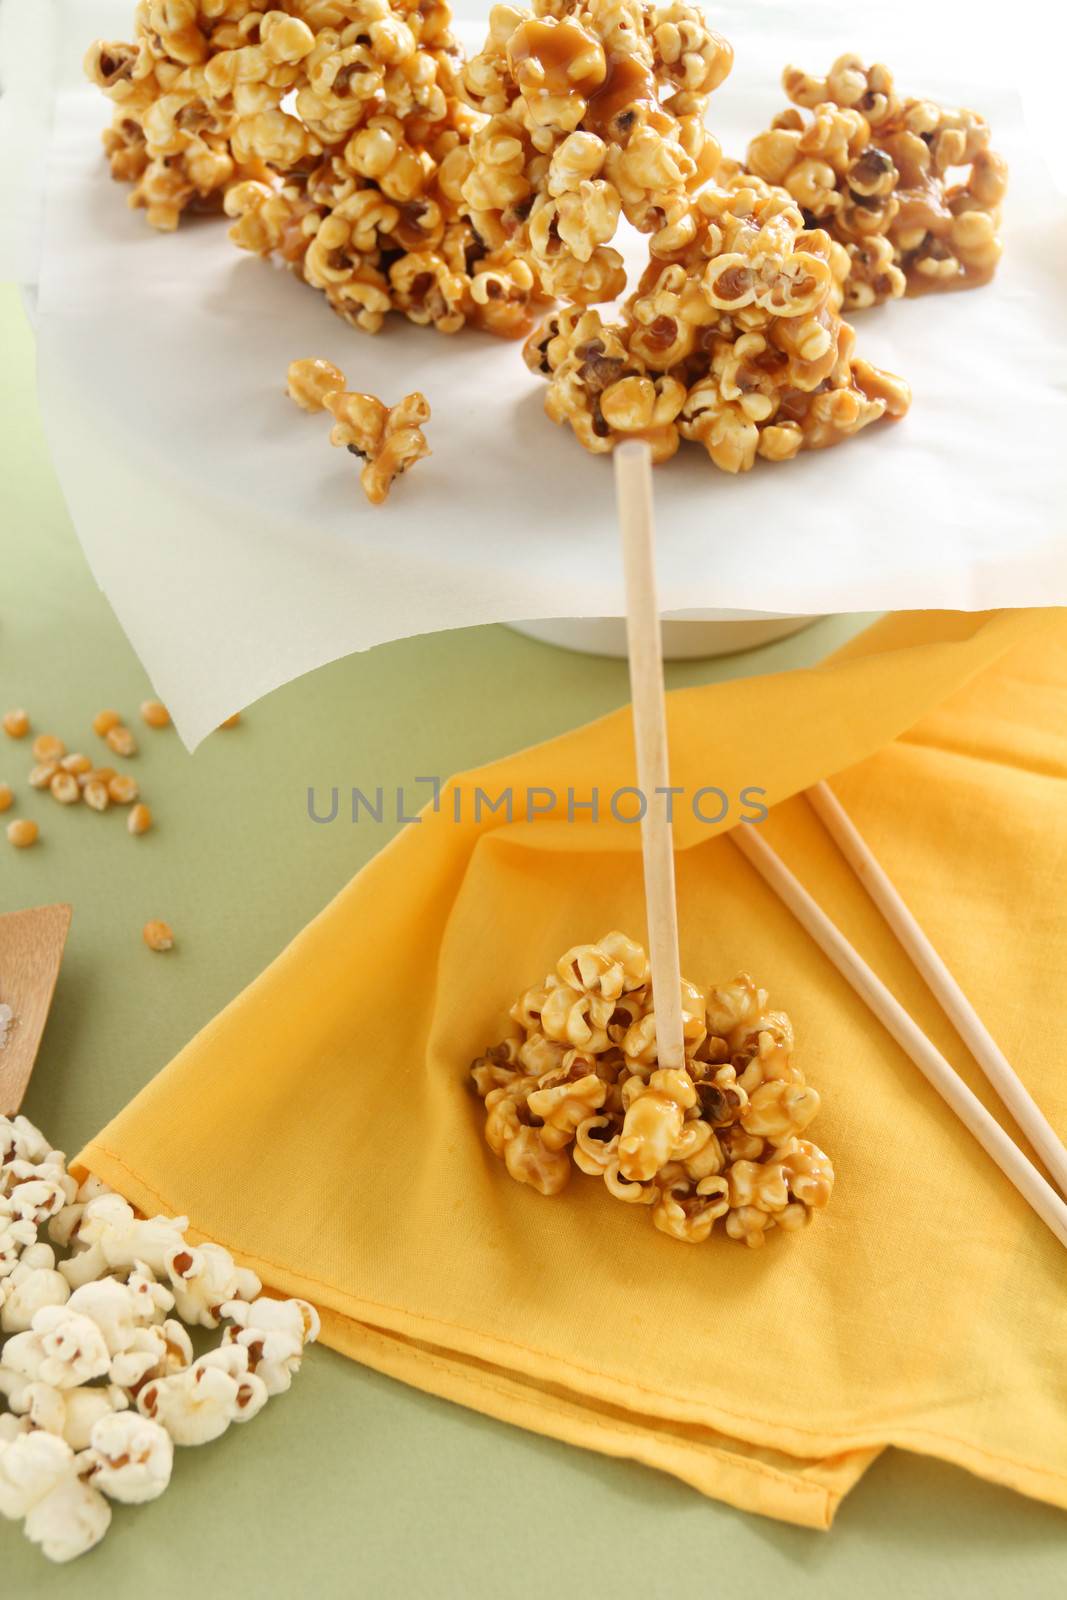 Caramel popcorn on a stick with raw popcorn on the side.